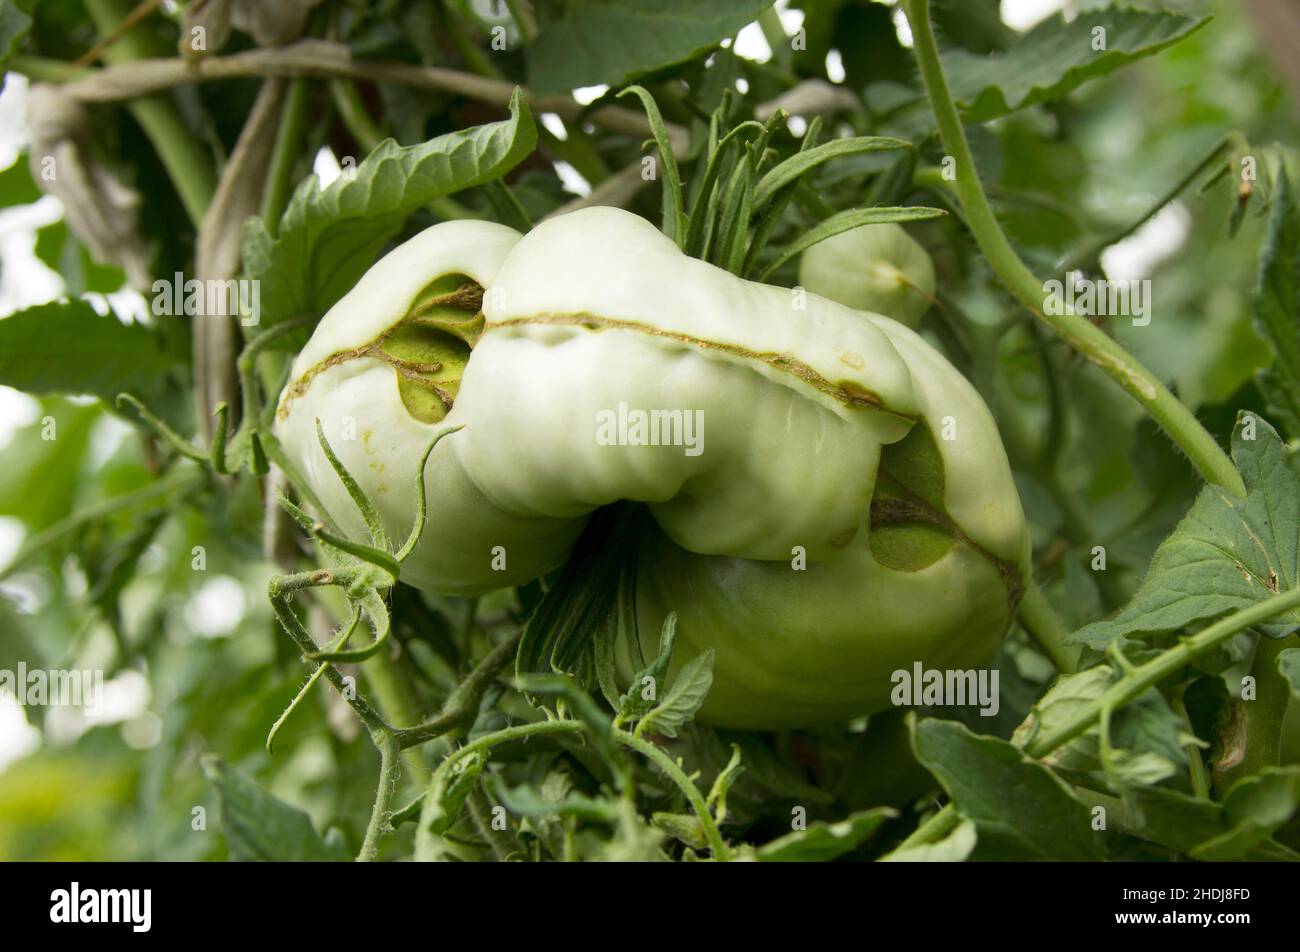 Tomato catface. Diseases of tomatoes. Lesion on the fruits. Severe malformation tomatoes. Scarring and cracking. Physiological disorder. Plant anomali Stock Photo